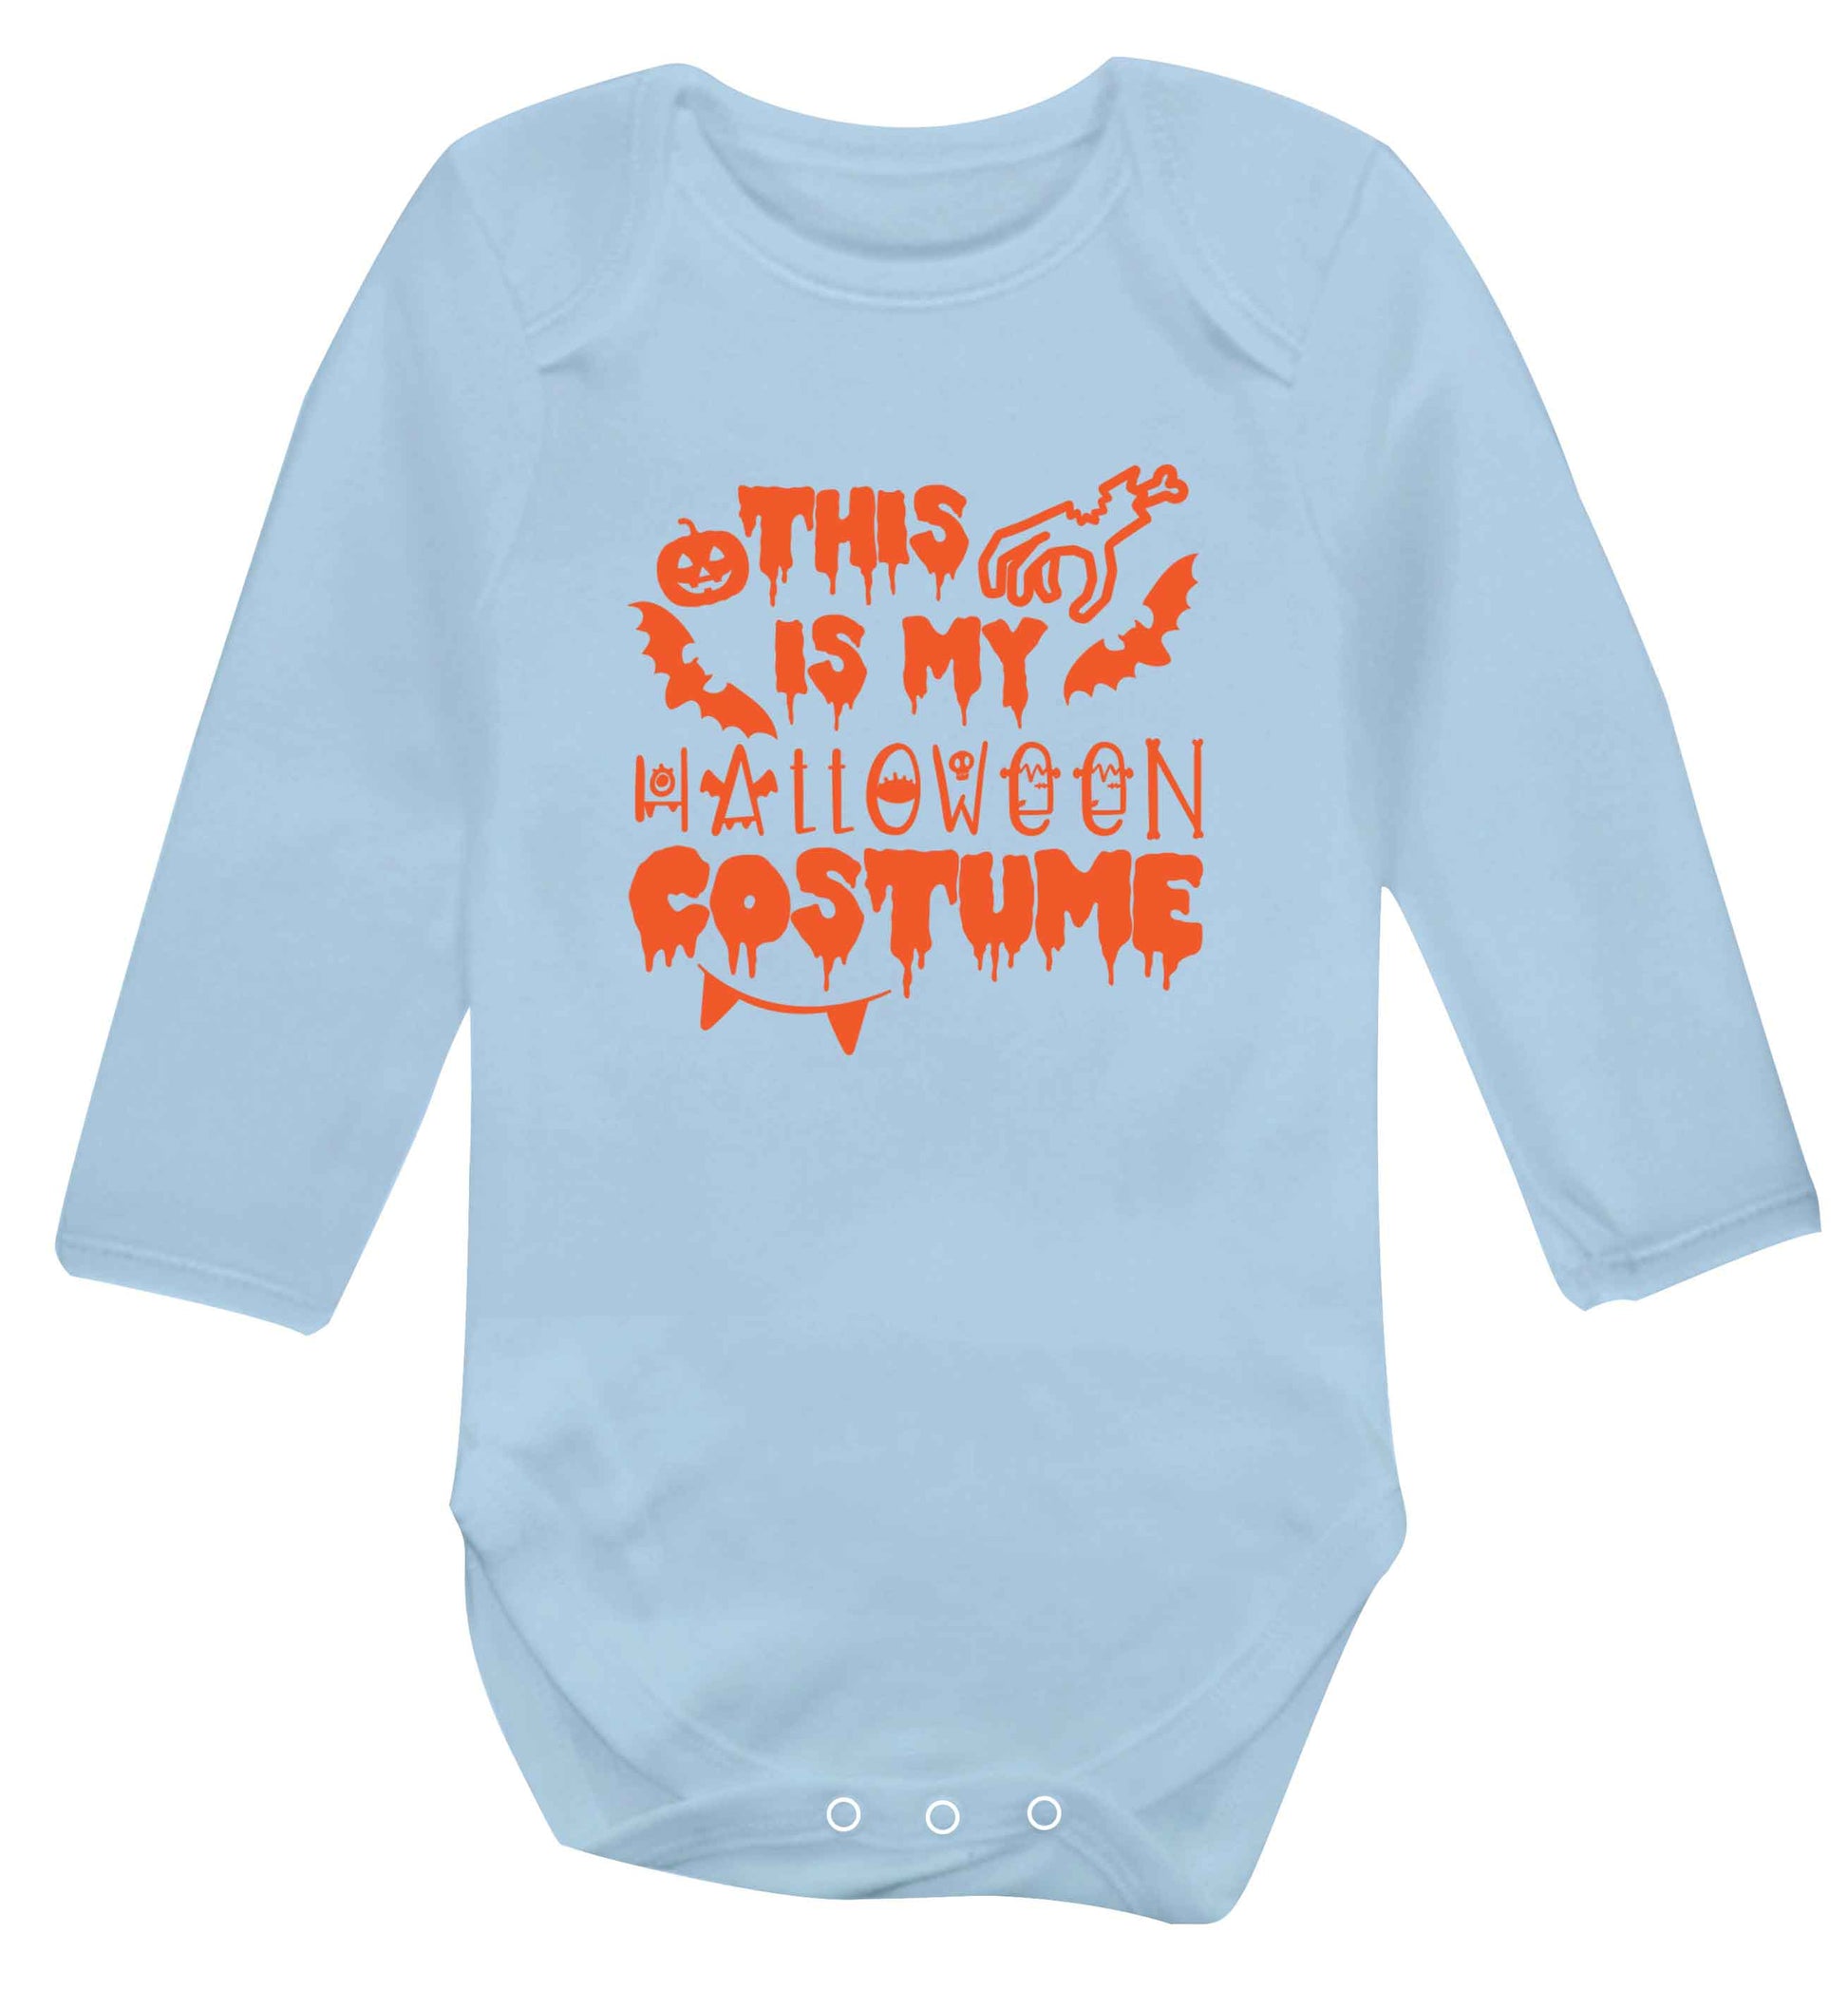 This is my halloween costume baby vest long sleeved pale blue 6-12 months